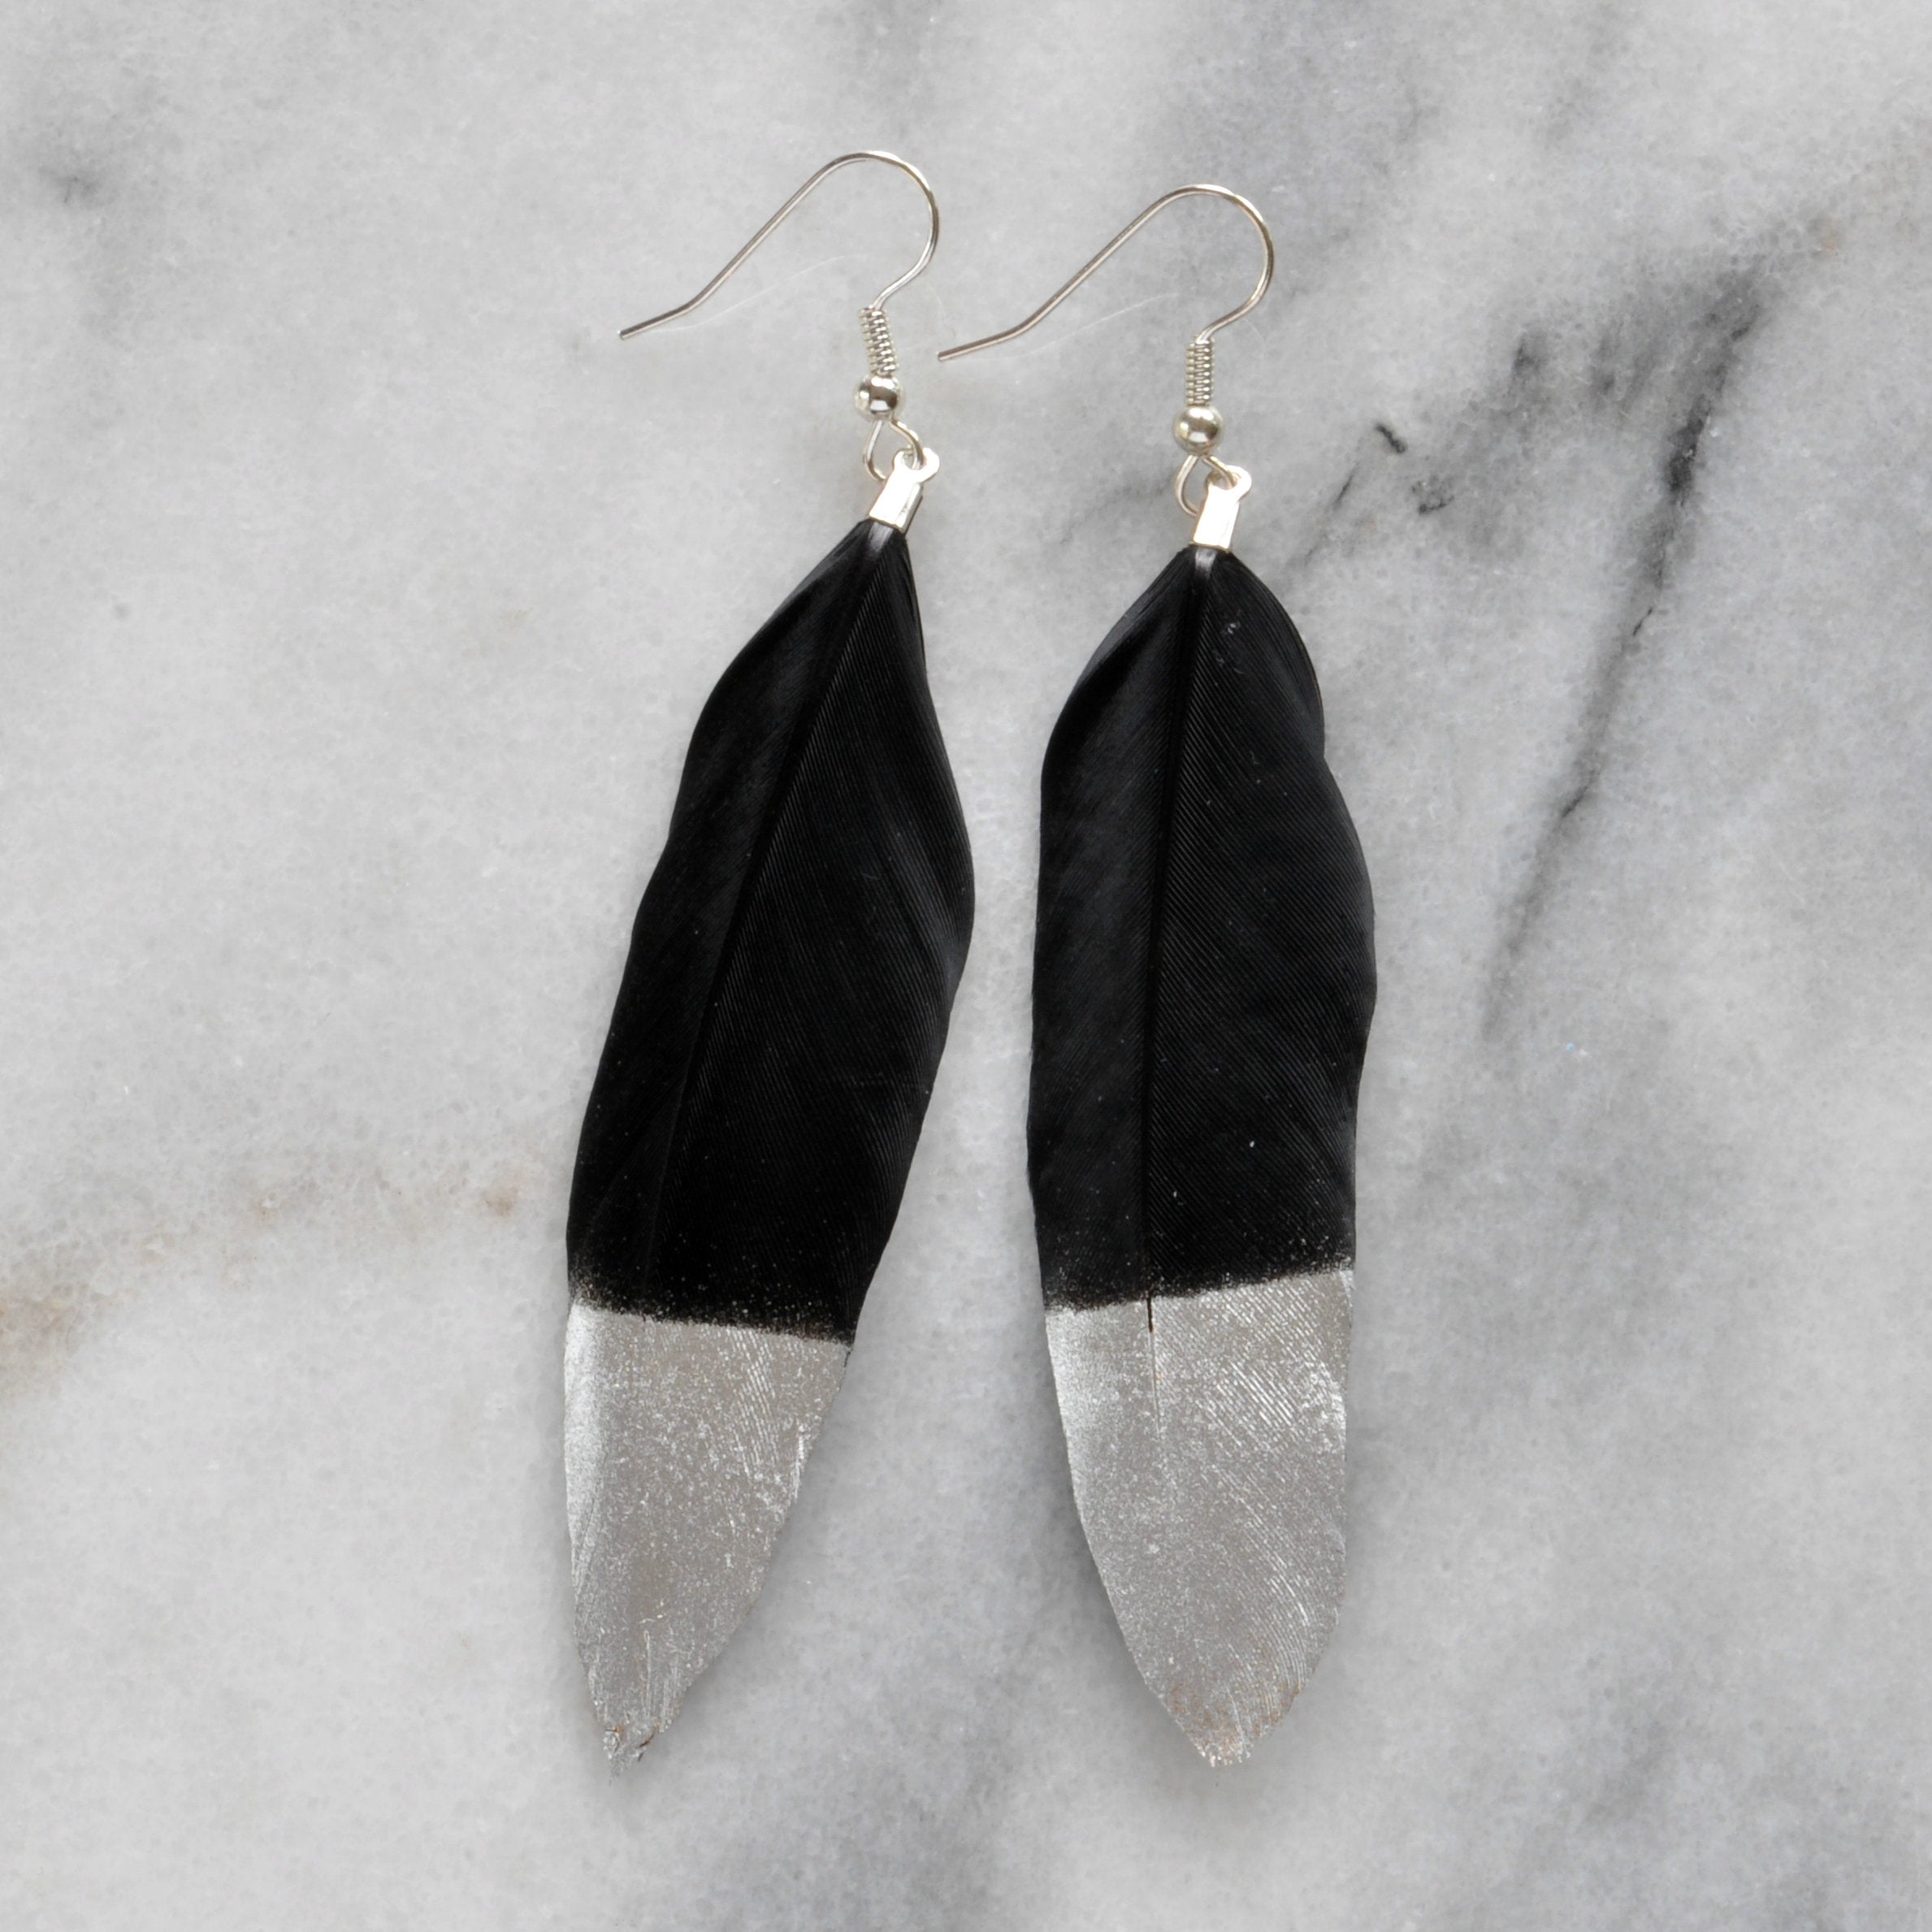 Libby & Smee Gold and Silver Feather Earrings in black with silver, still life 